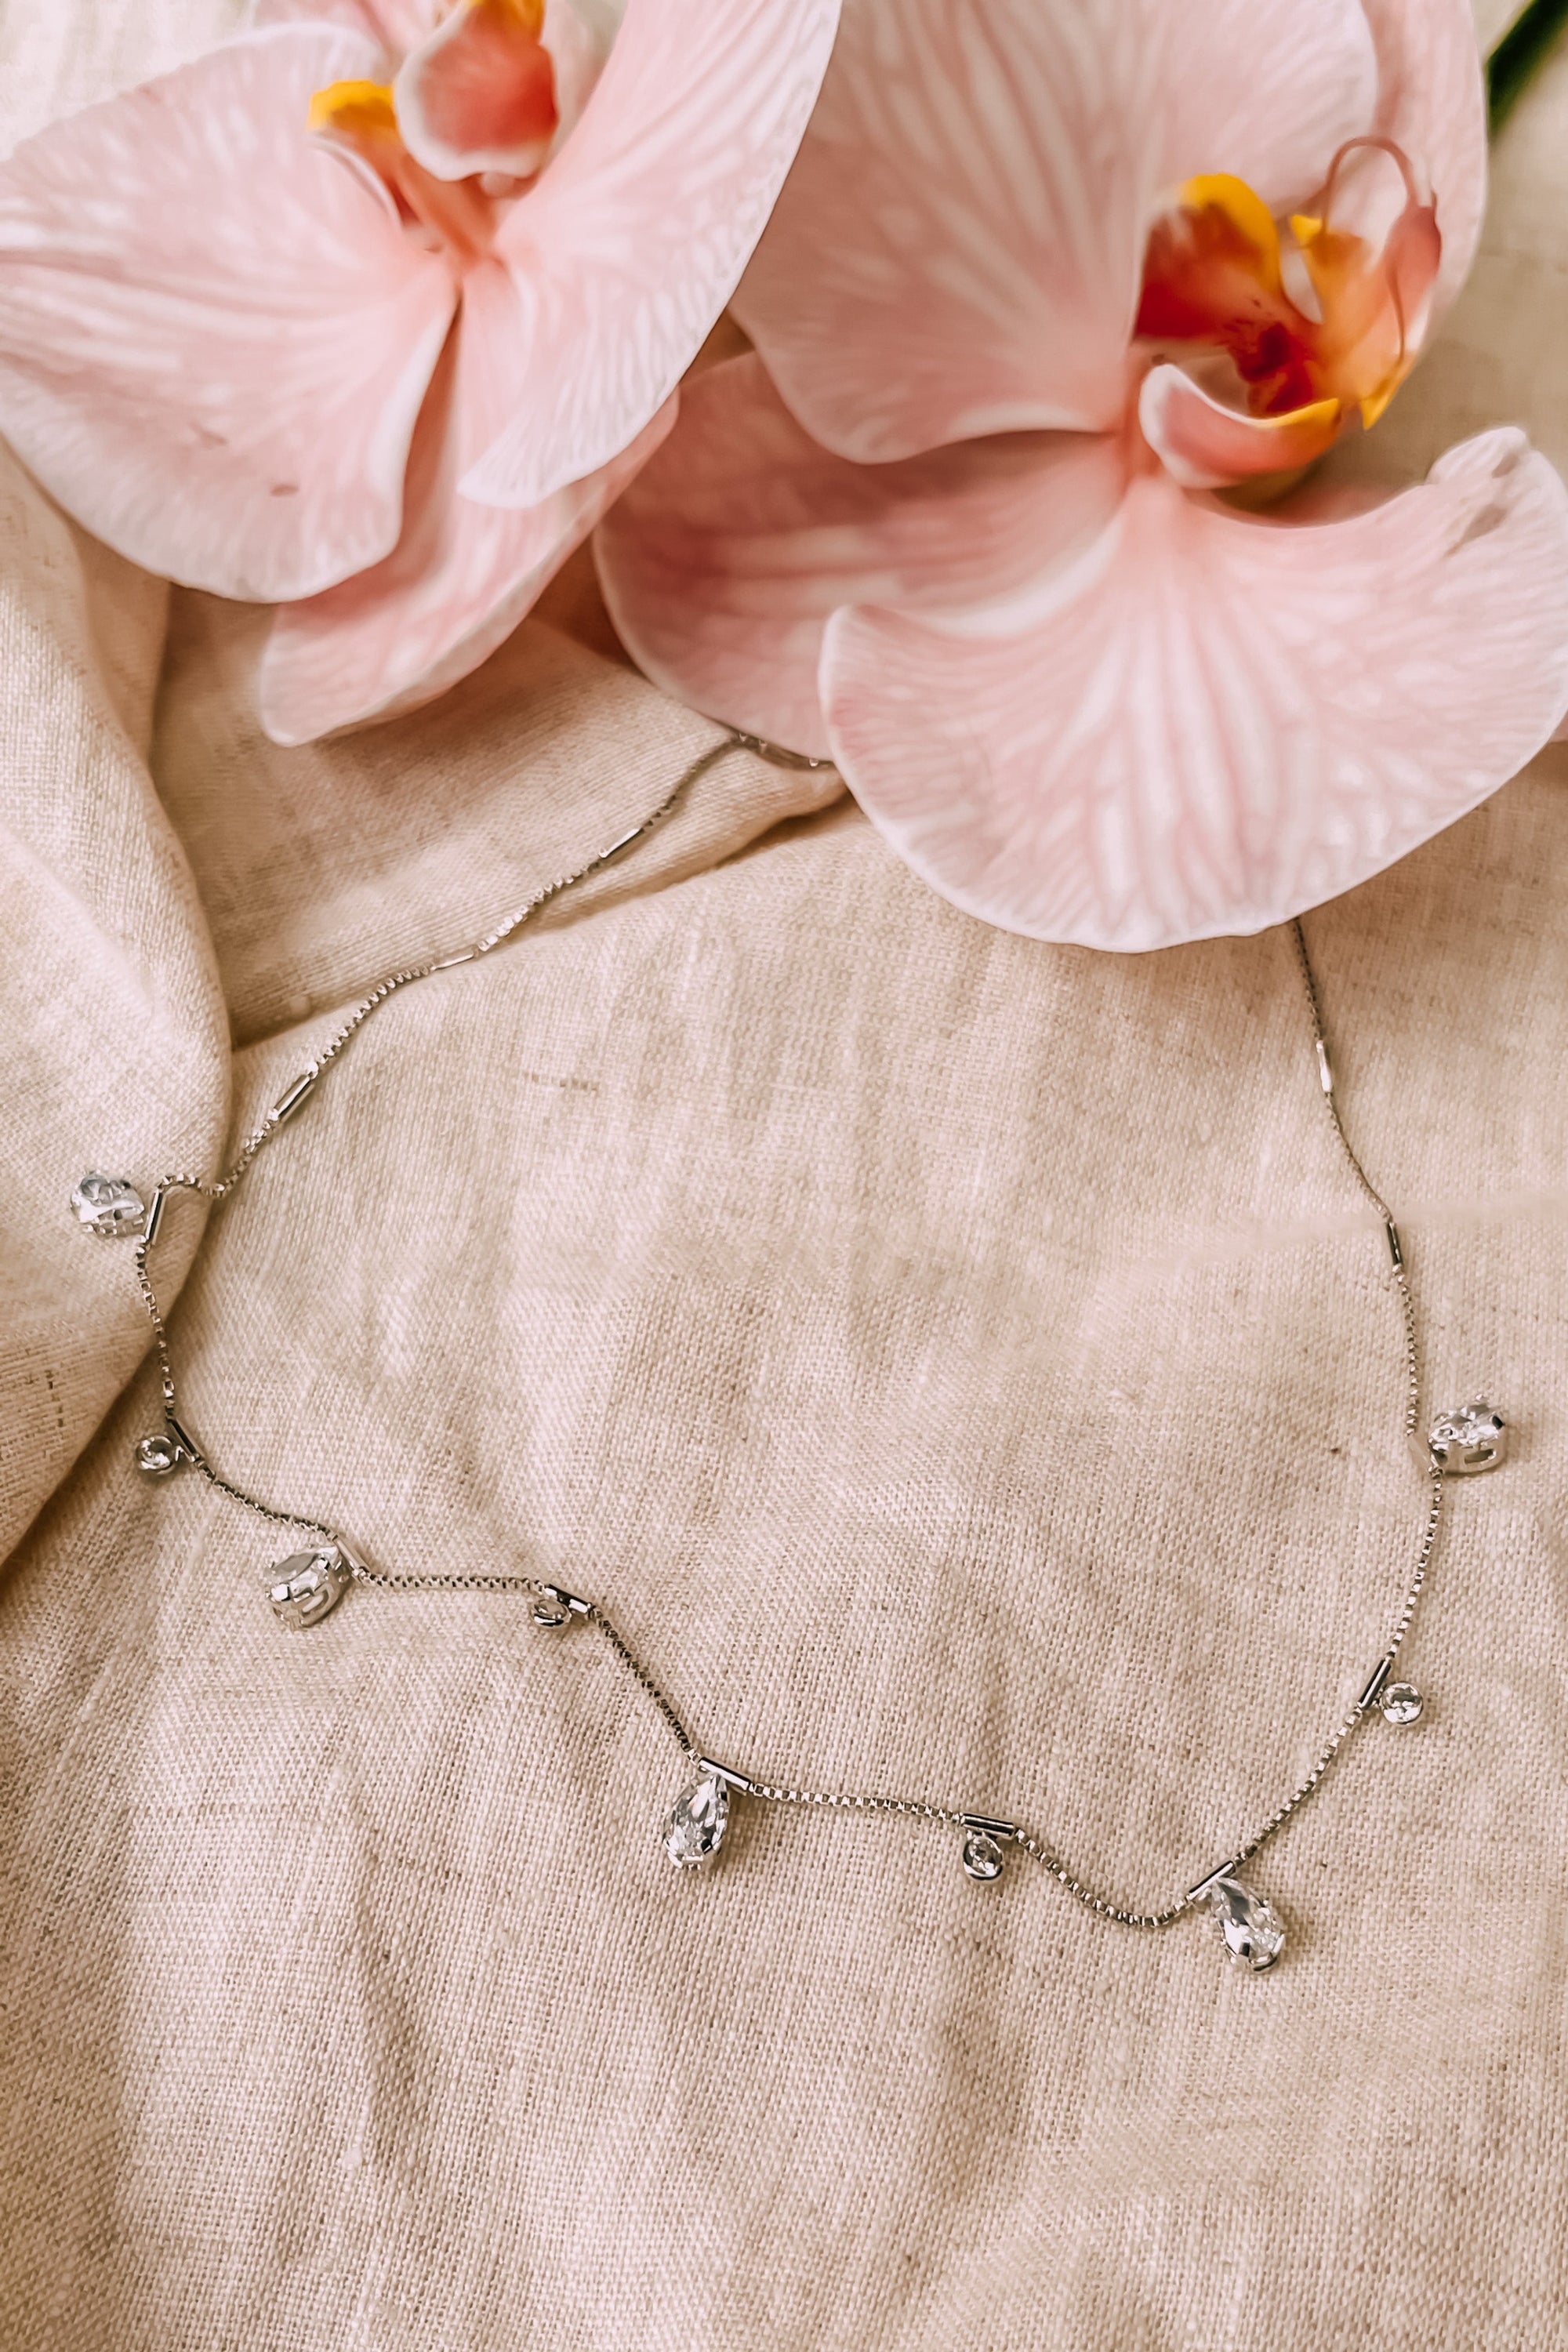  "White gold-filled necklace with tear-drop charms and delicate chain design."